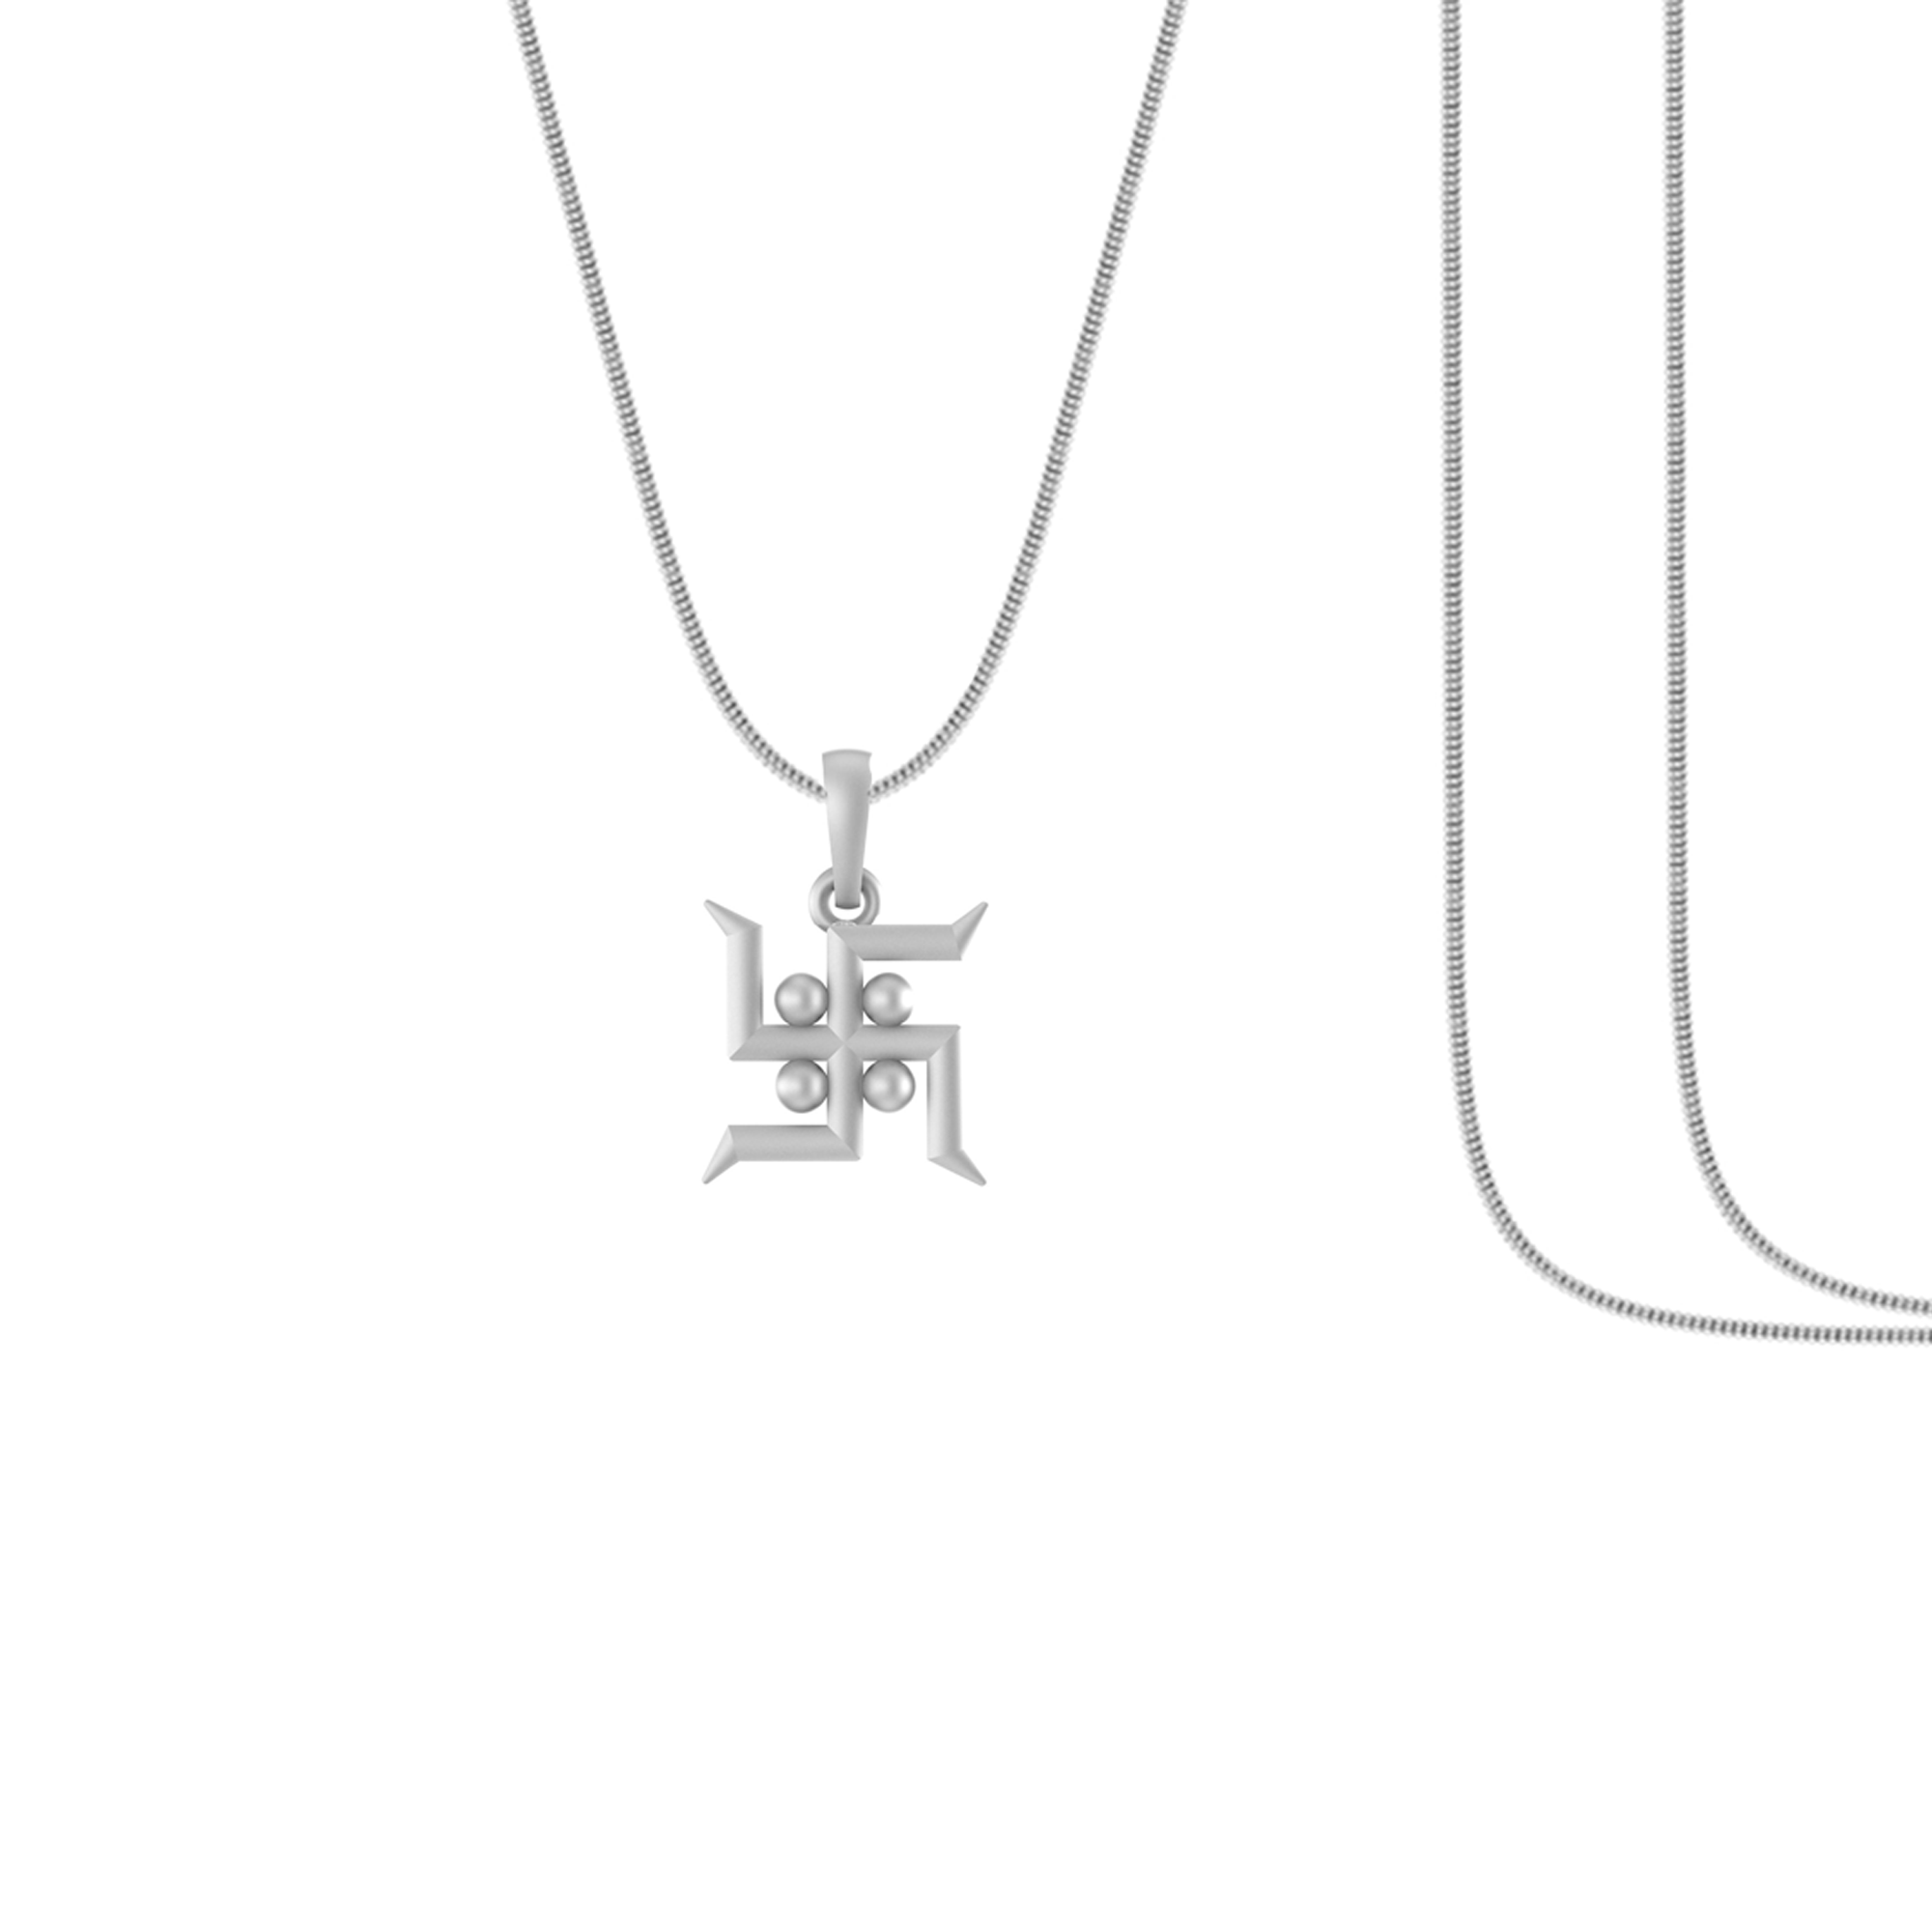 Silver Spiritual Swastik Symbol Chain Pendant (92.5% purity)by Akshat Sapphire Swastik Symbol Chain Pendant for Kids(Snake Chain: 15 Inches)